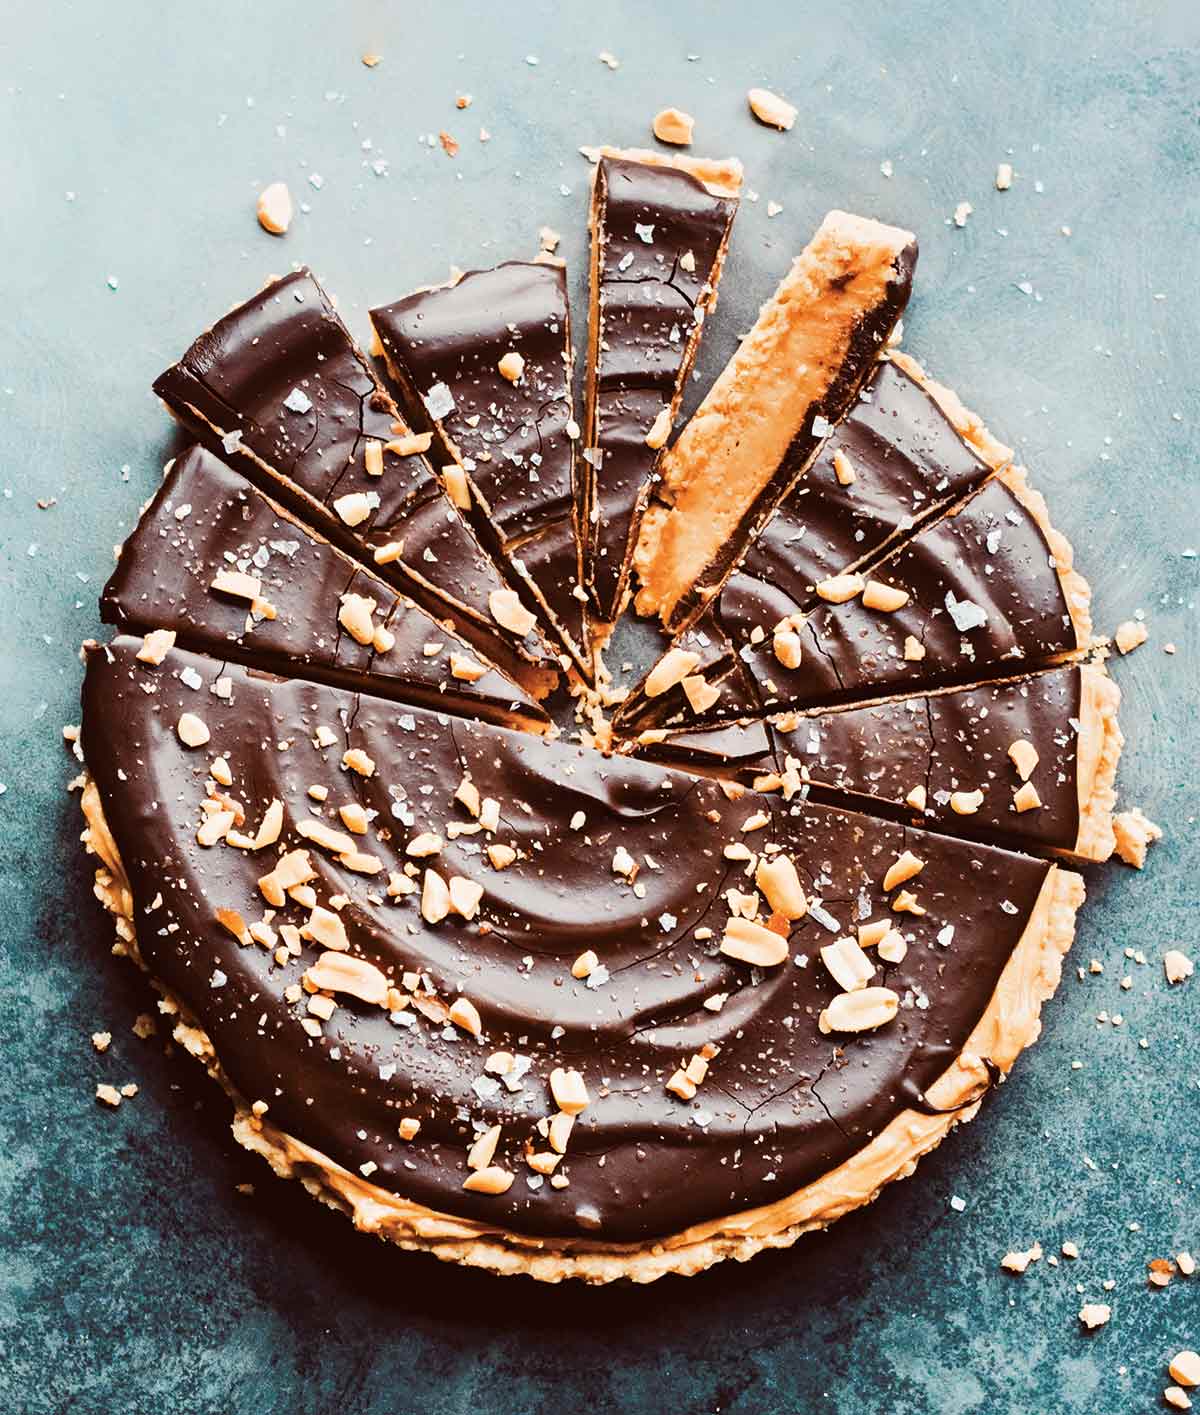 Salted chocolate and peanut butter tart cut into slices, garnished with chopped peanuts.